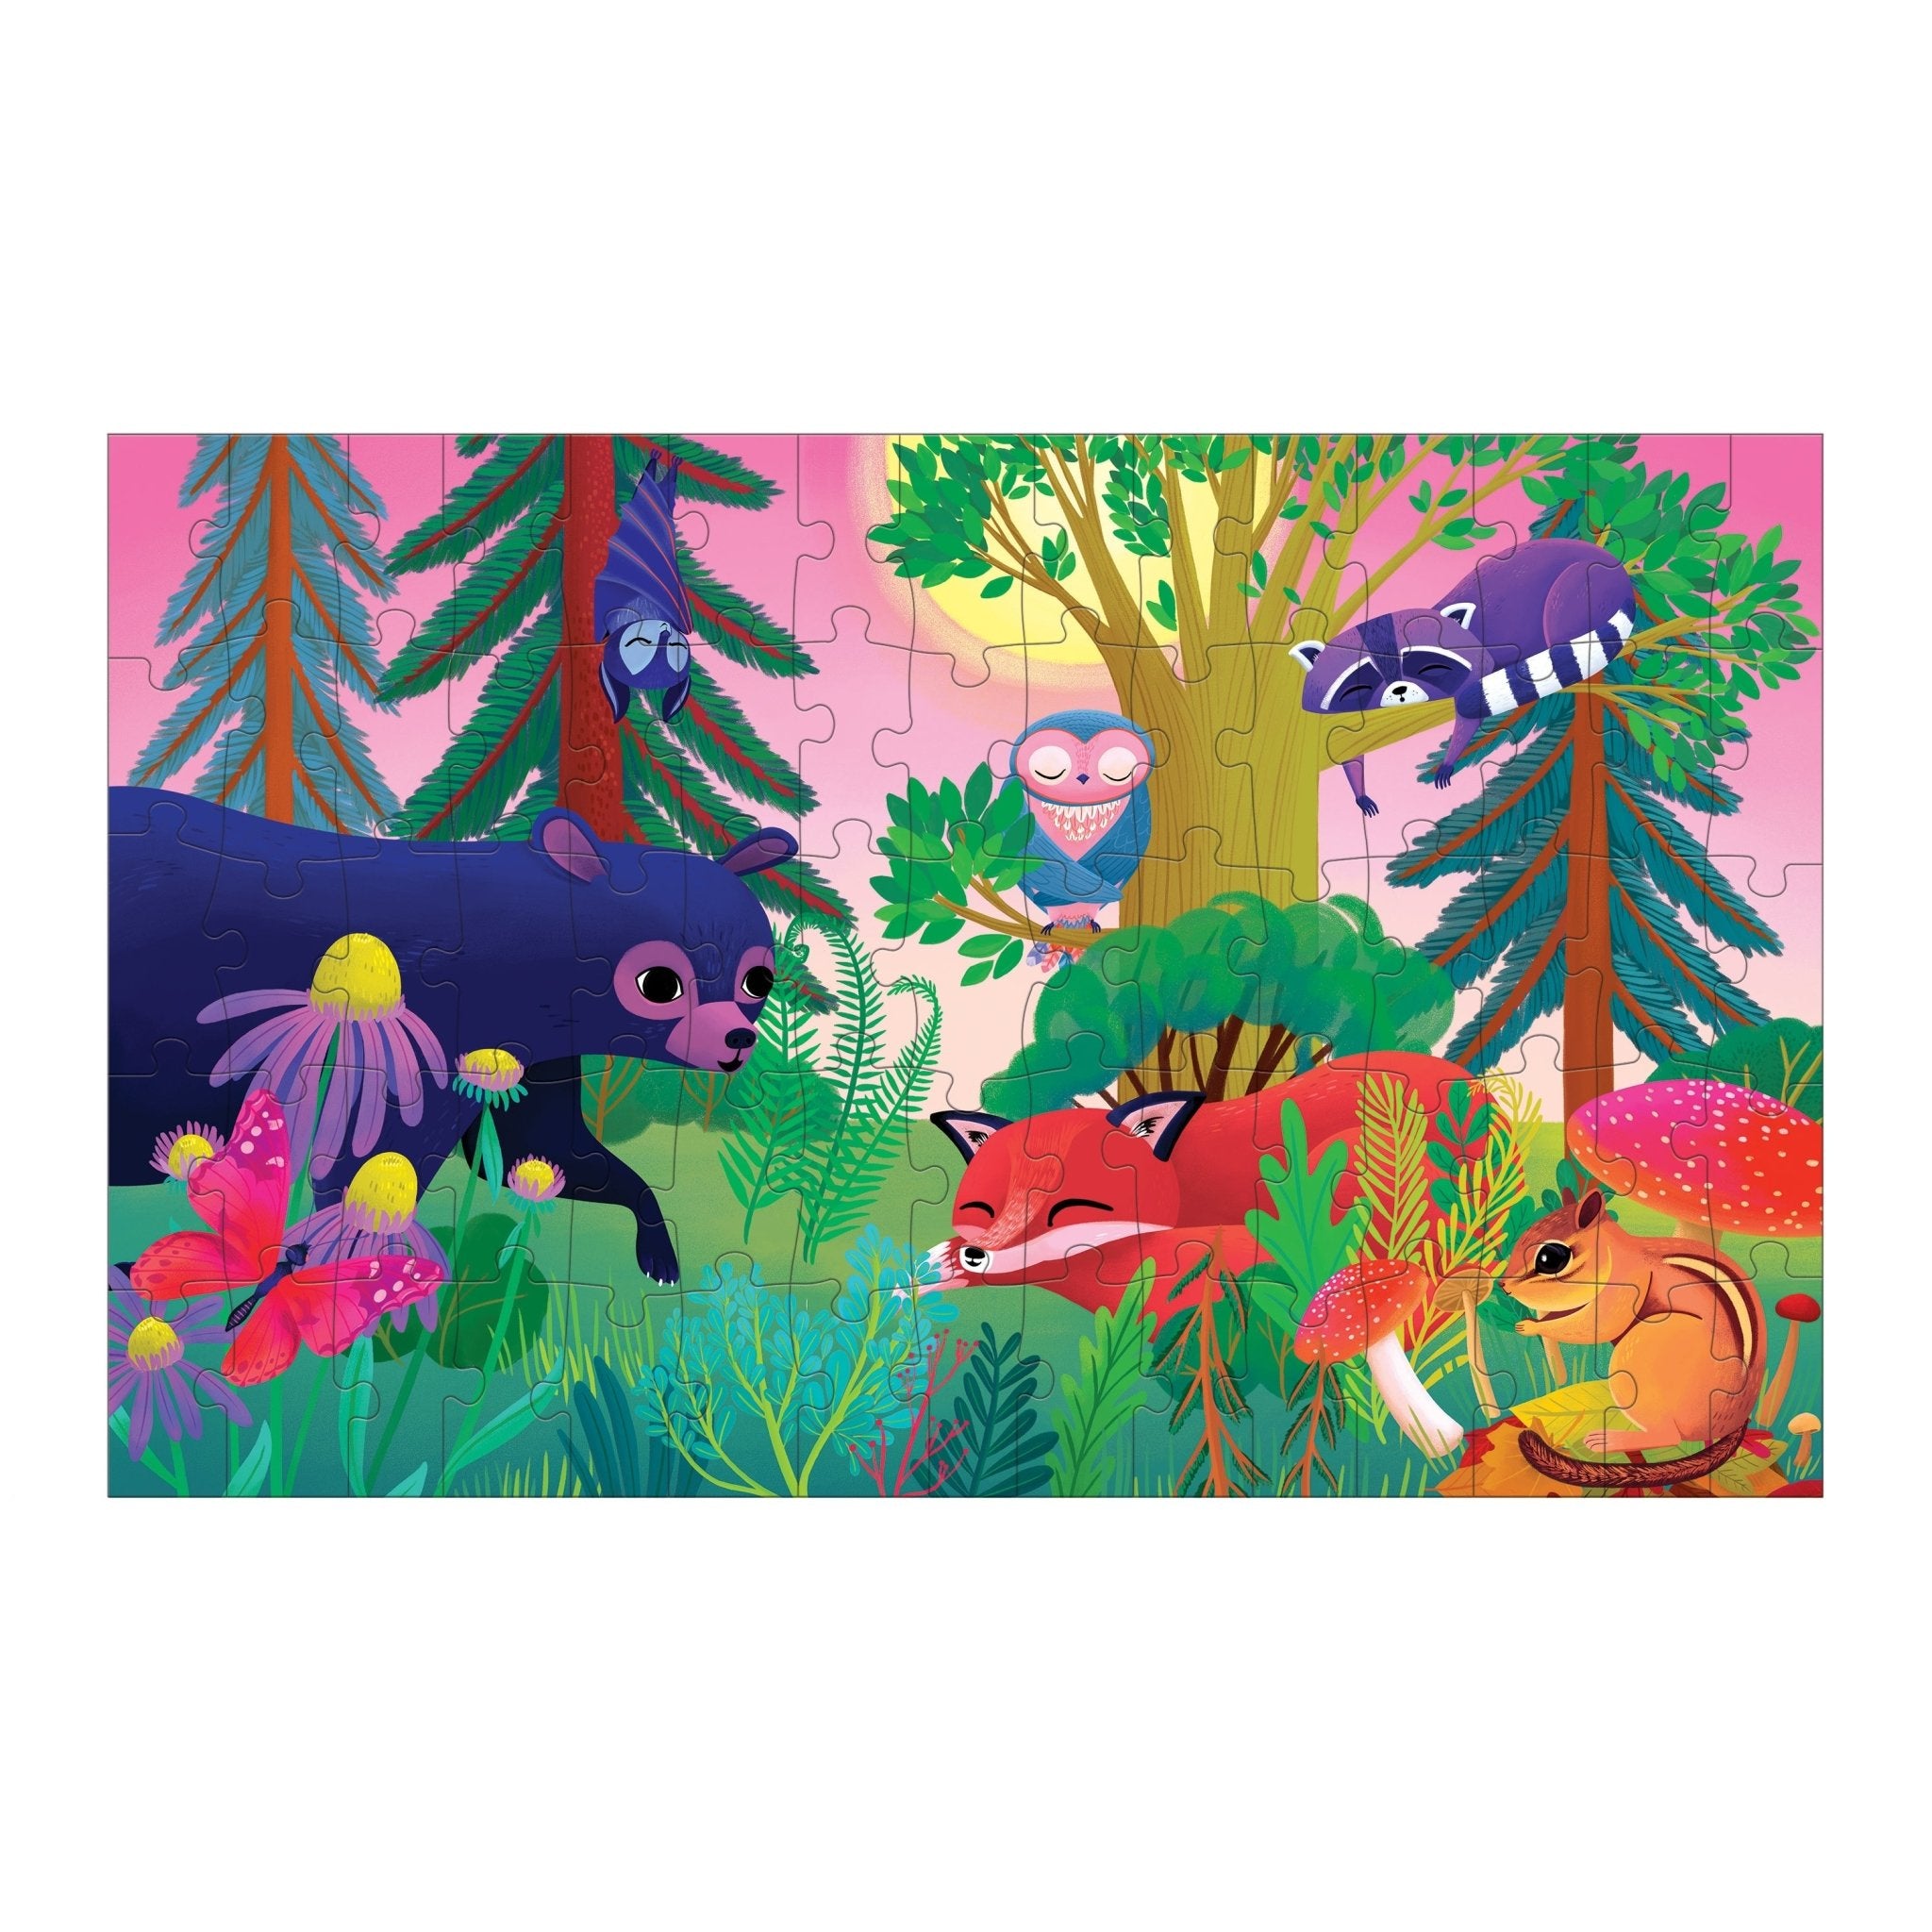 Enchanted Forest, 100 Pieces, Djeco